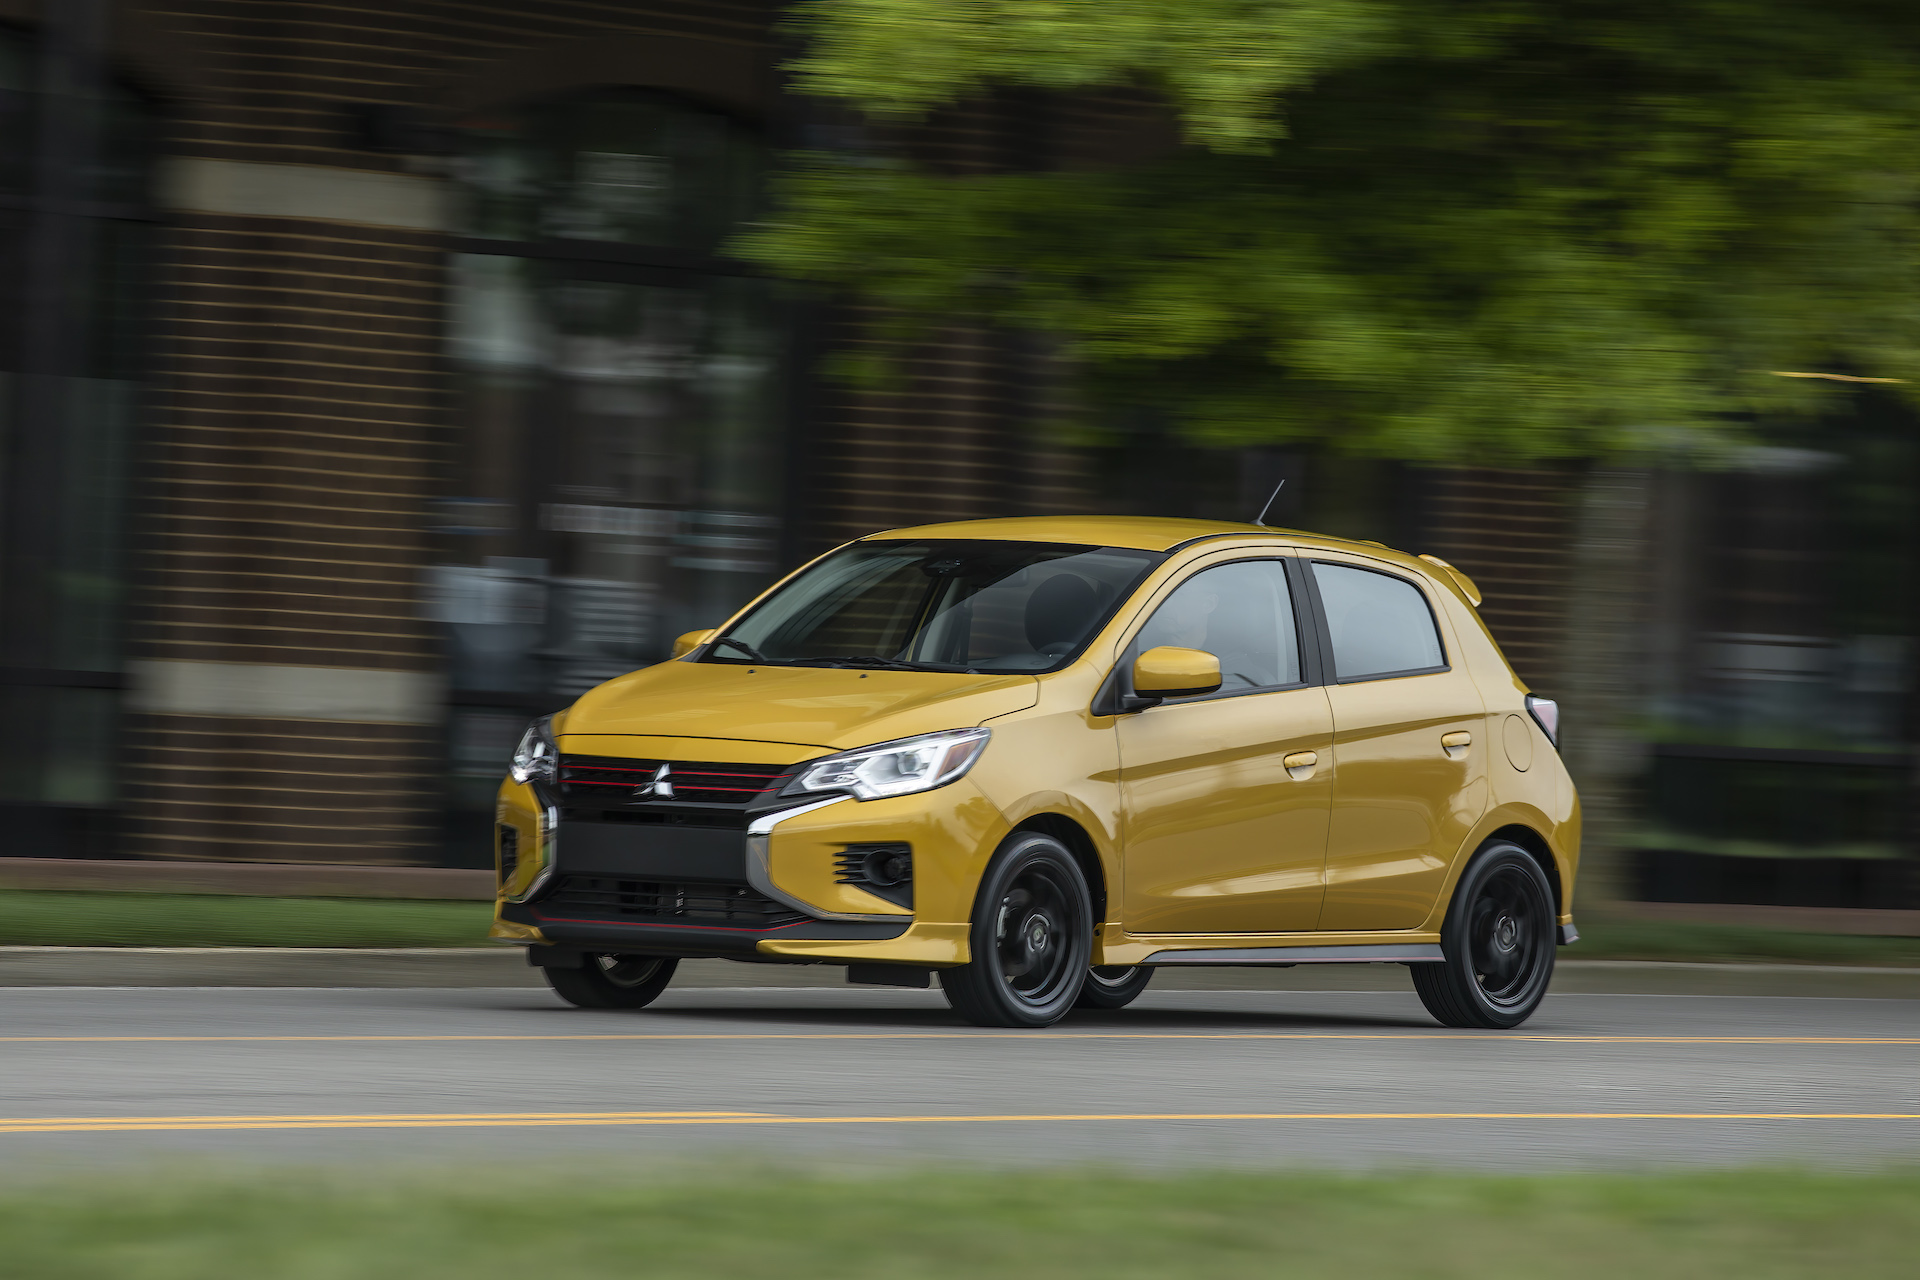 2021 Mitsubishi Mirage Review, Ratings, Specs, Prices, and Photos The